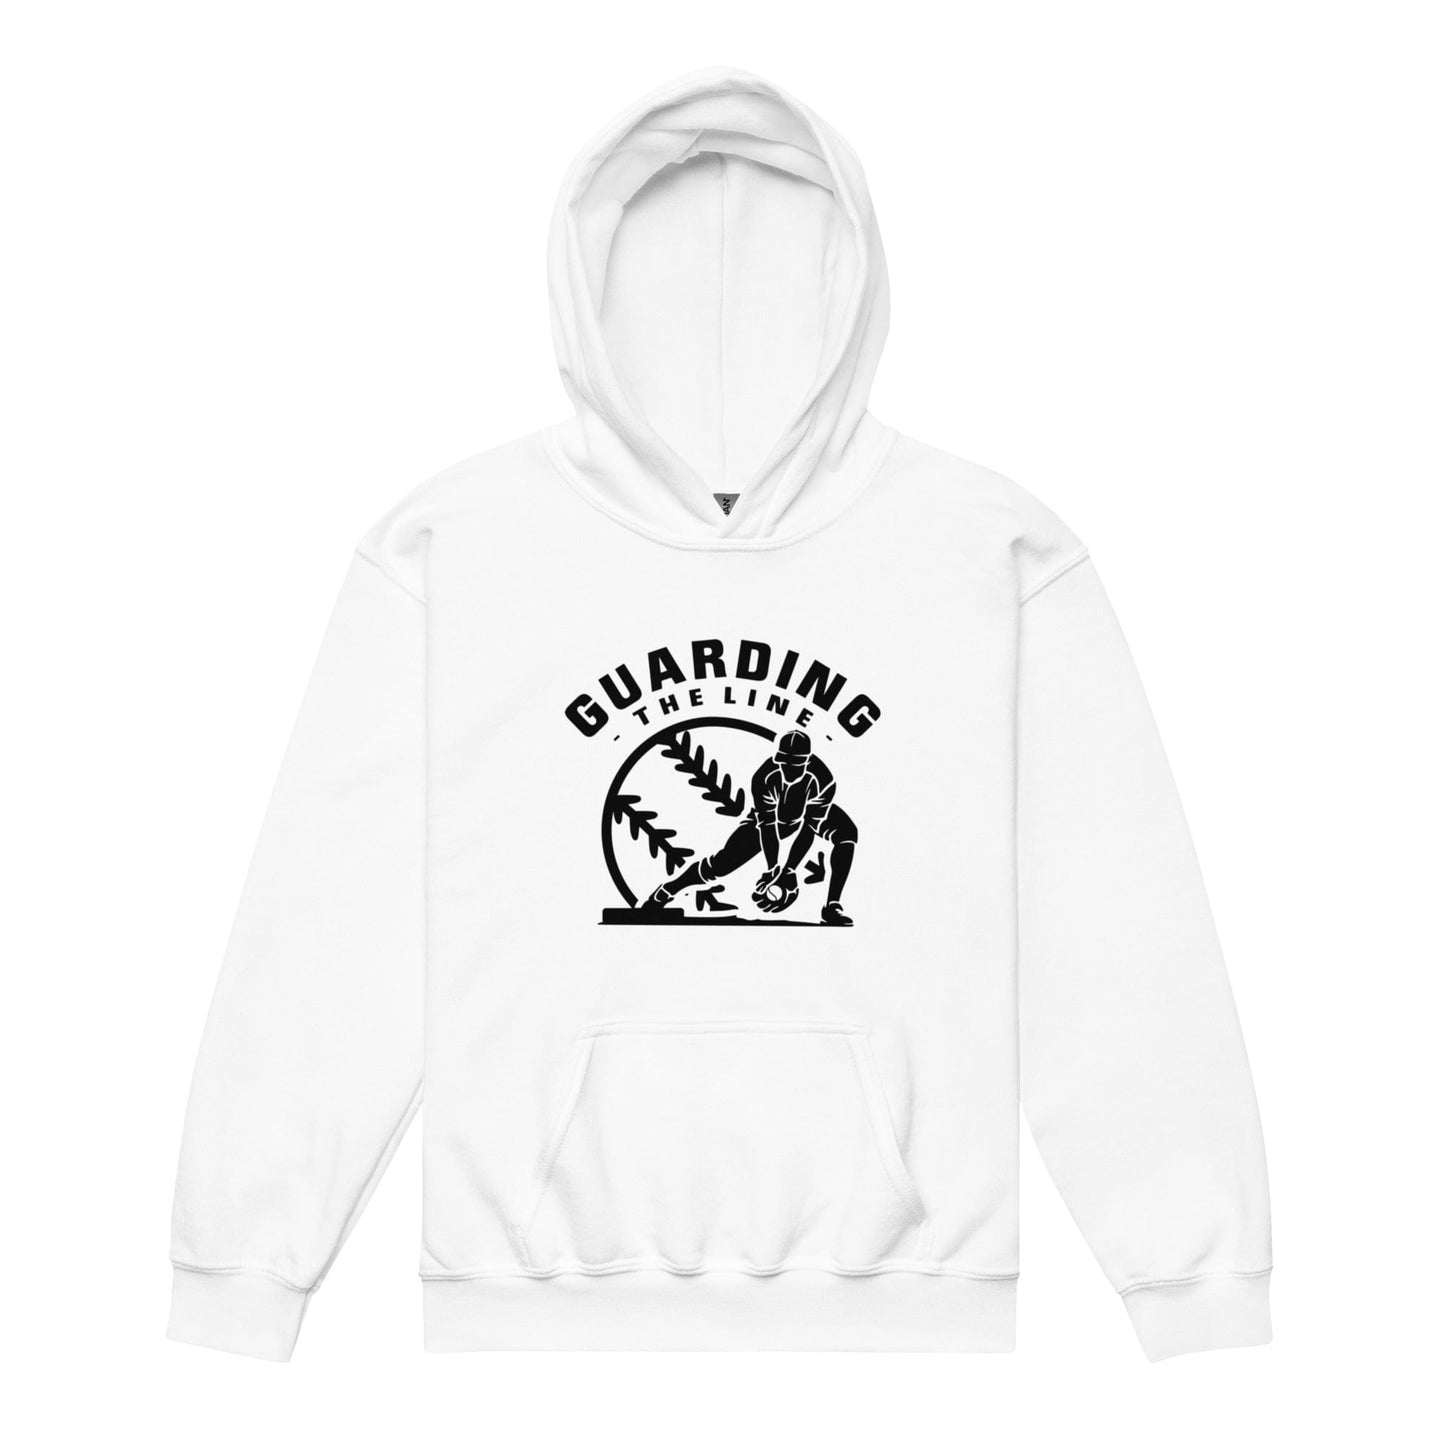 Guarding The Line - Youth Hoodie